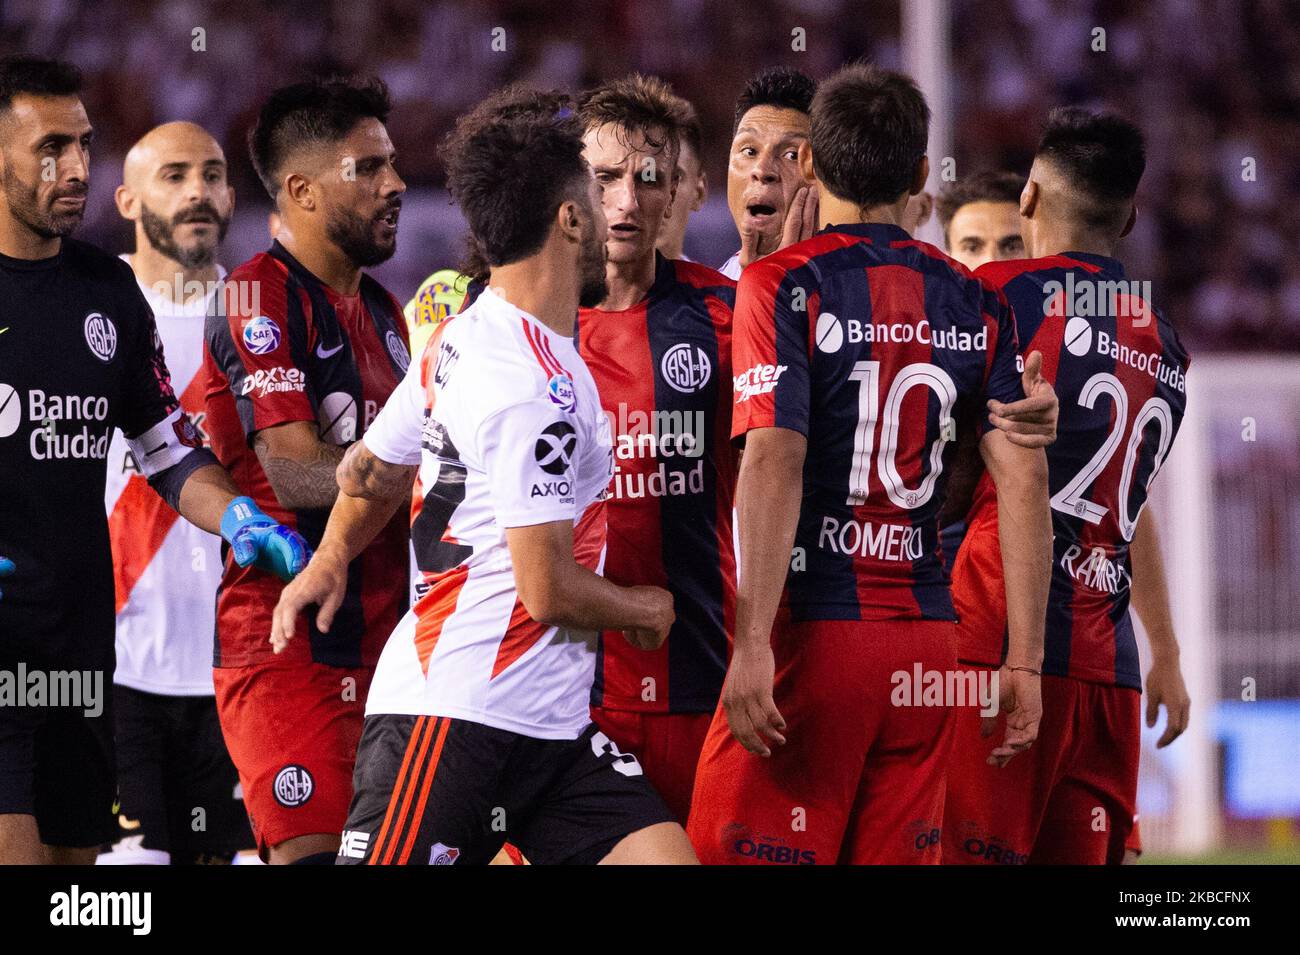 Players of River Plate fights with players of San Lorenzo during a match between River Plate and San Lorenzo as part of Superliga 2019/20 at Estadio Monumental Antonio Vespucio Liberti on December 8, 2019 in Buenos Aires, Argentina (Photo by Manuel Cortina/NurPhoto) Stock Photo